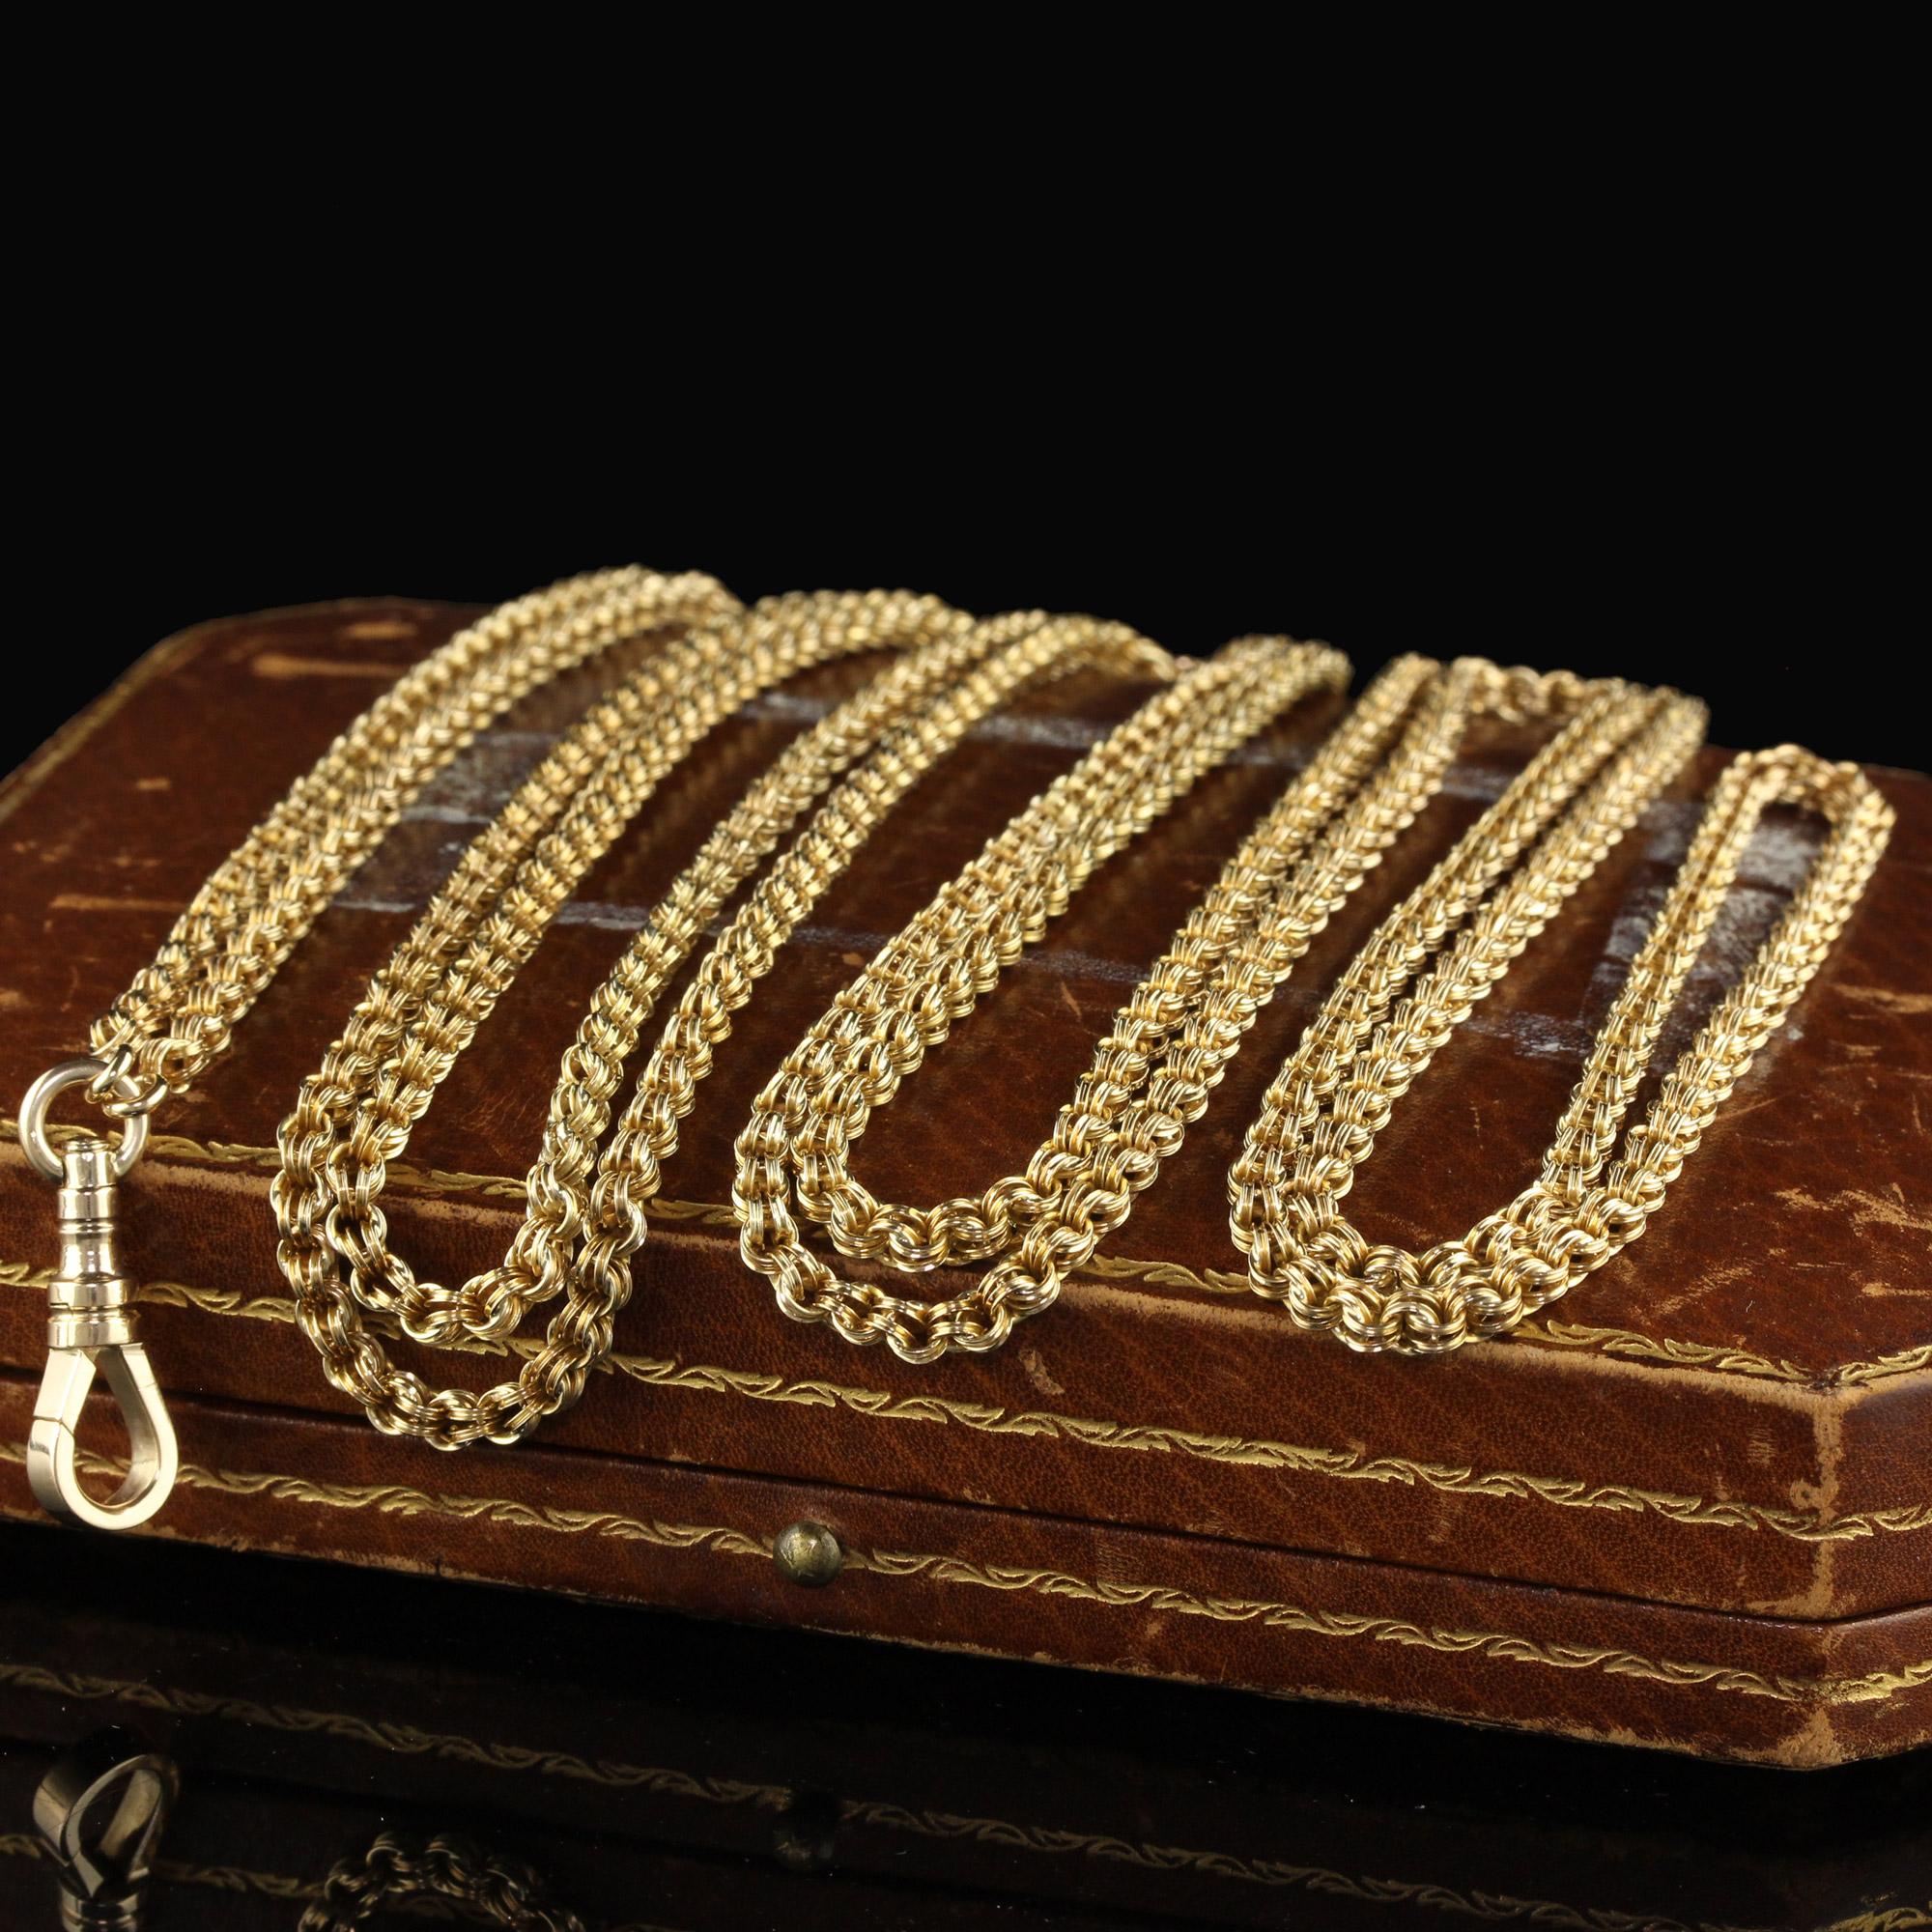 Beautiful Antique Victorian 14K Yellow Gold Intricate Link Chain Necklace - 32 Inches. This gorgeous necklace is crafted in 14k yellow gold. The chain has a beautiful chain link design that looks like it is being weaved together like fabric. The